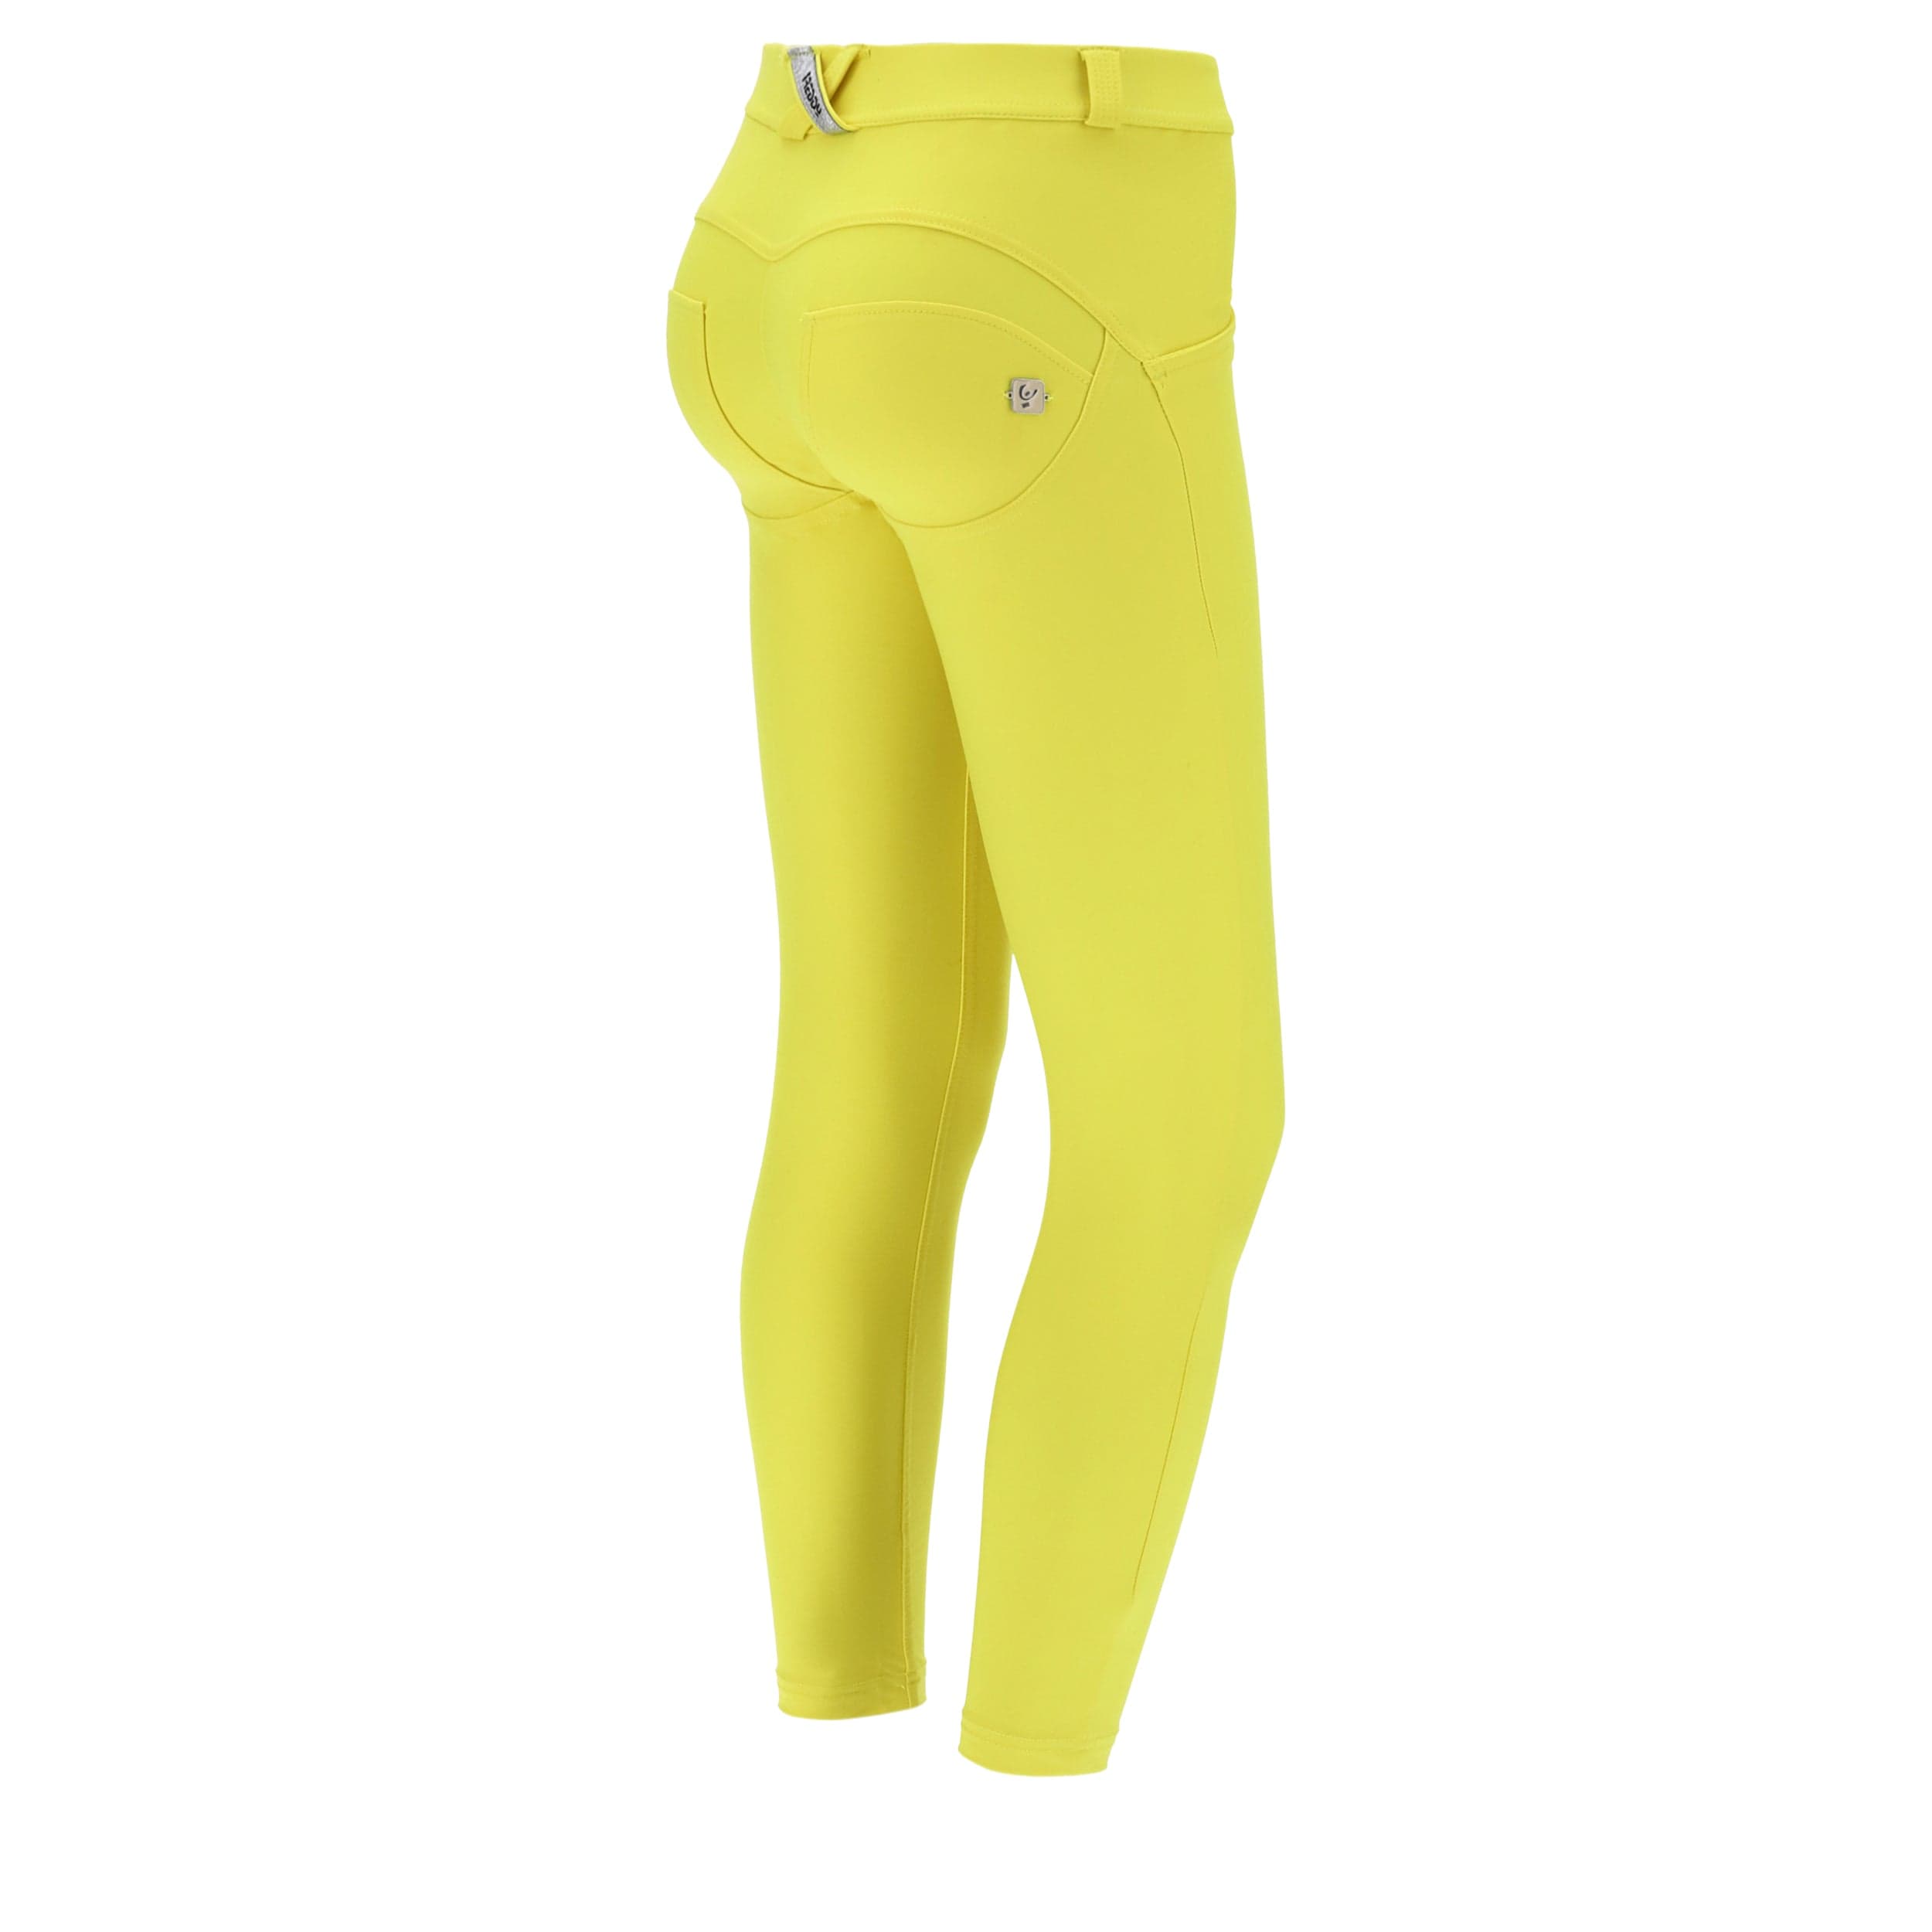 WR.UP® Fashion - Mid Rise - 7/8 Length - Fluoro Yellow 1